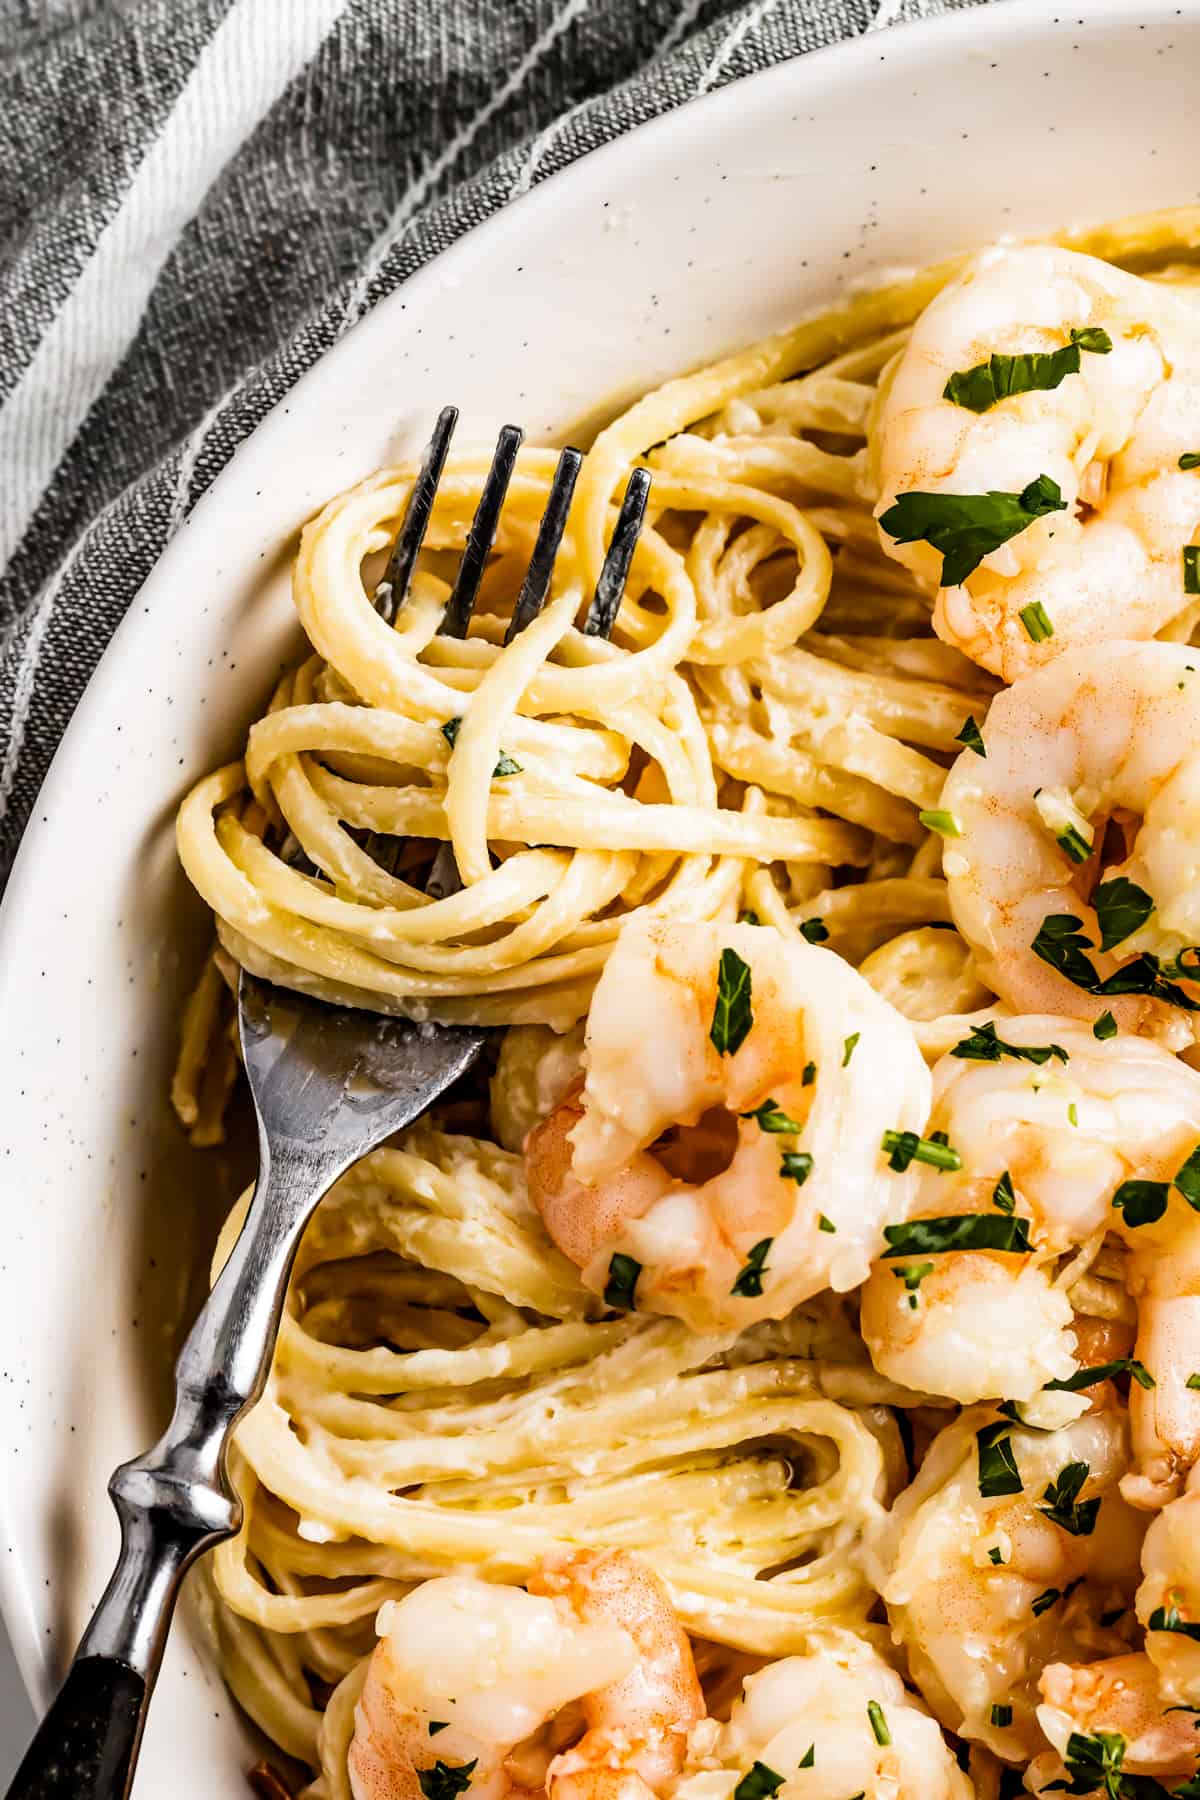 Close-up of homemade alfredo pasta with shrimp, with some of the pasta twirled around a fork.